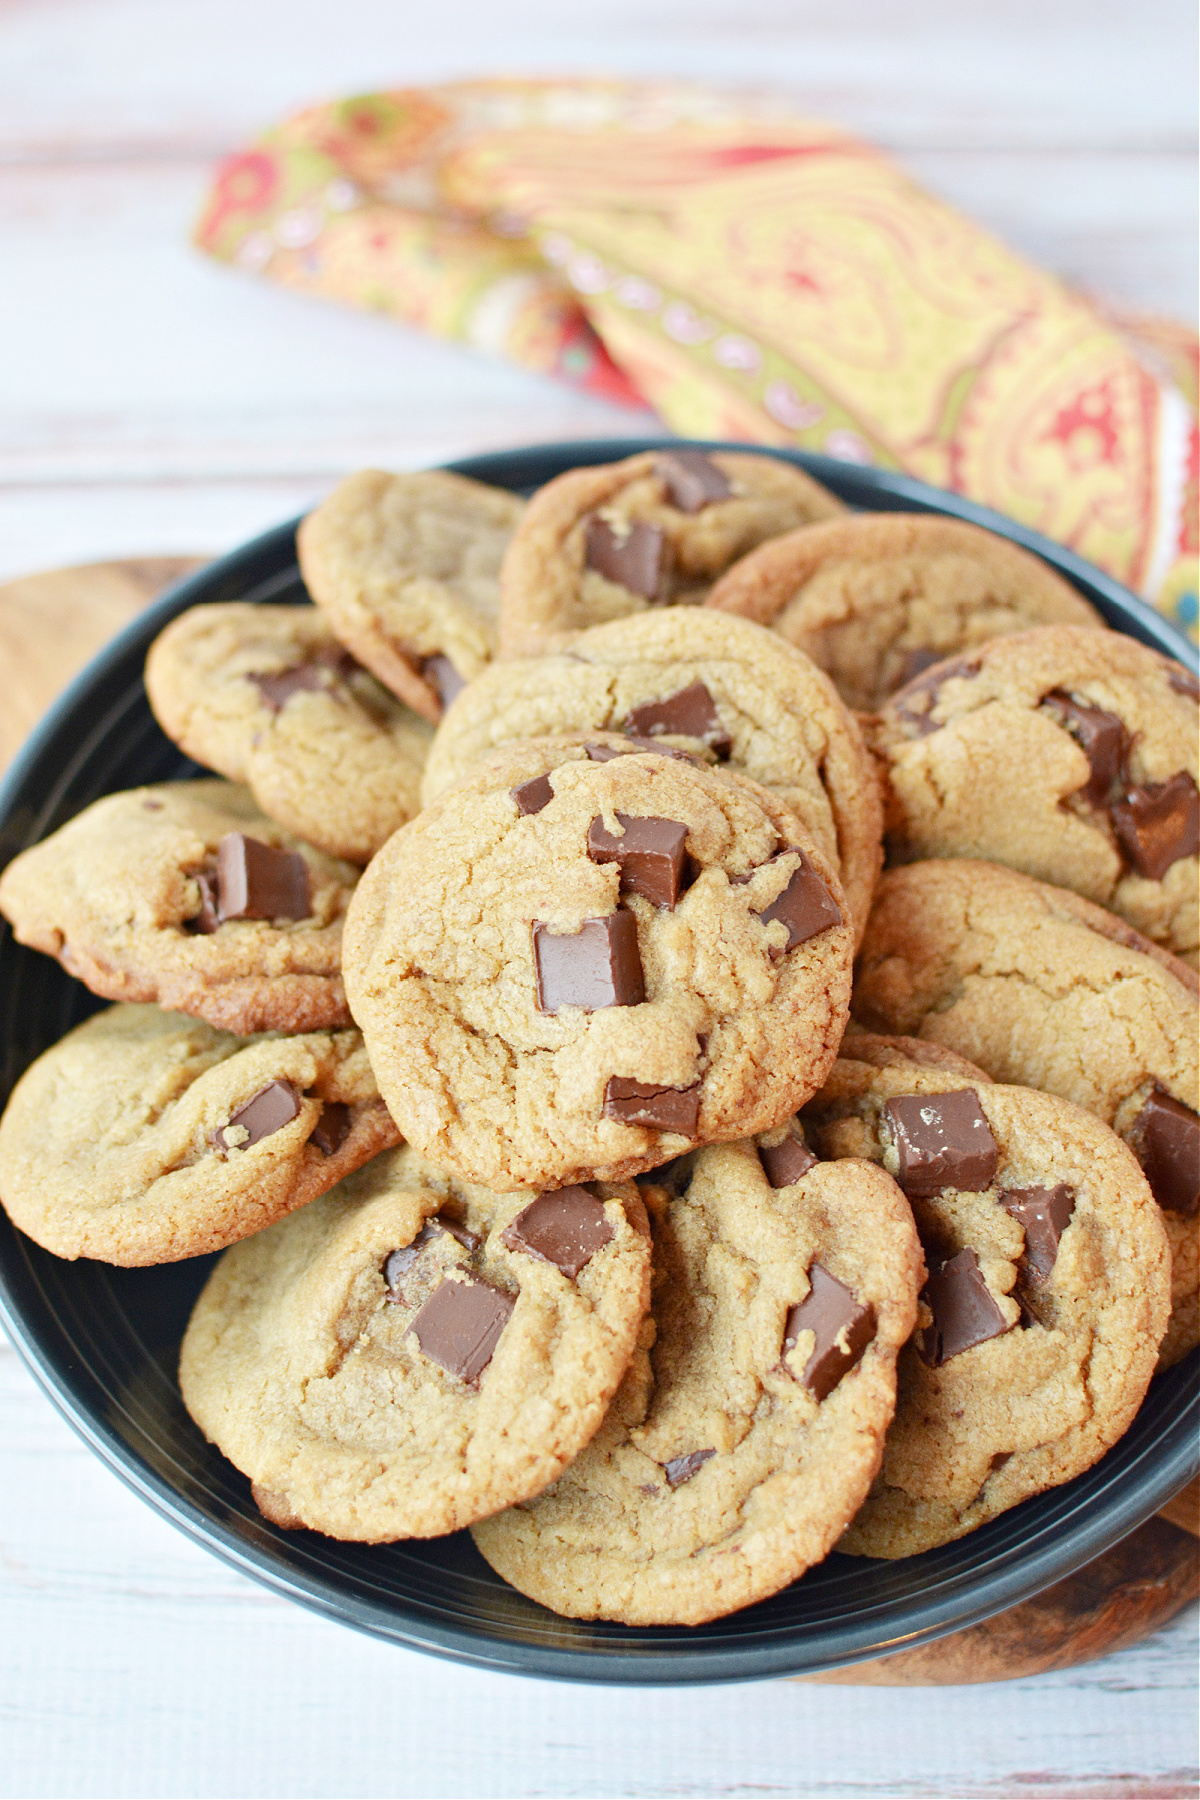 Million Dollar Cookies filled with chocolate chunks